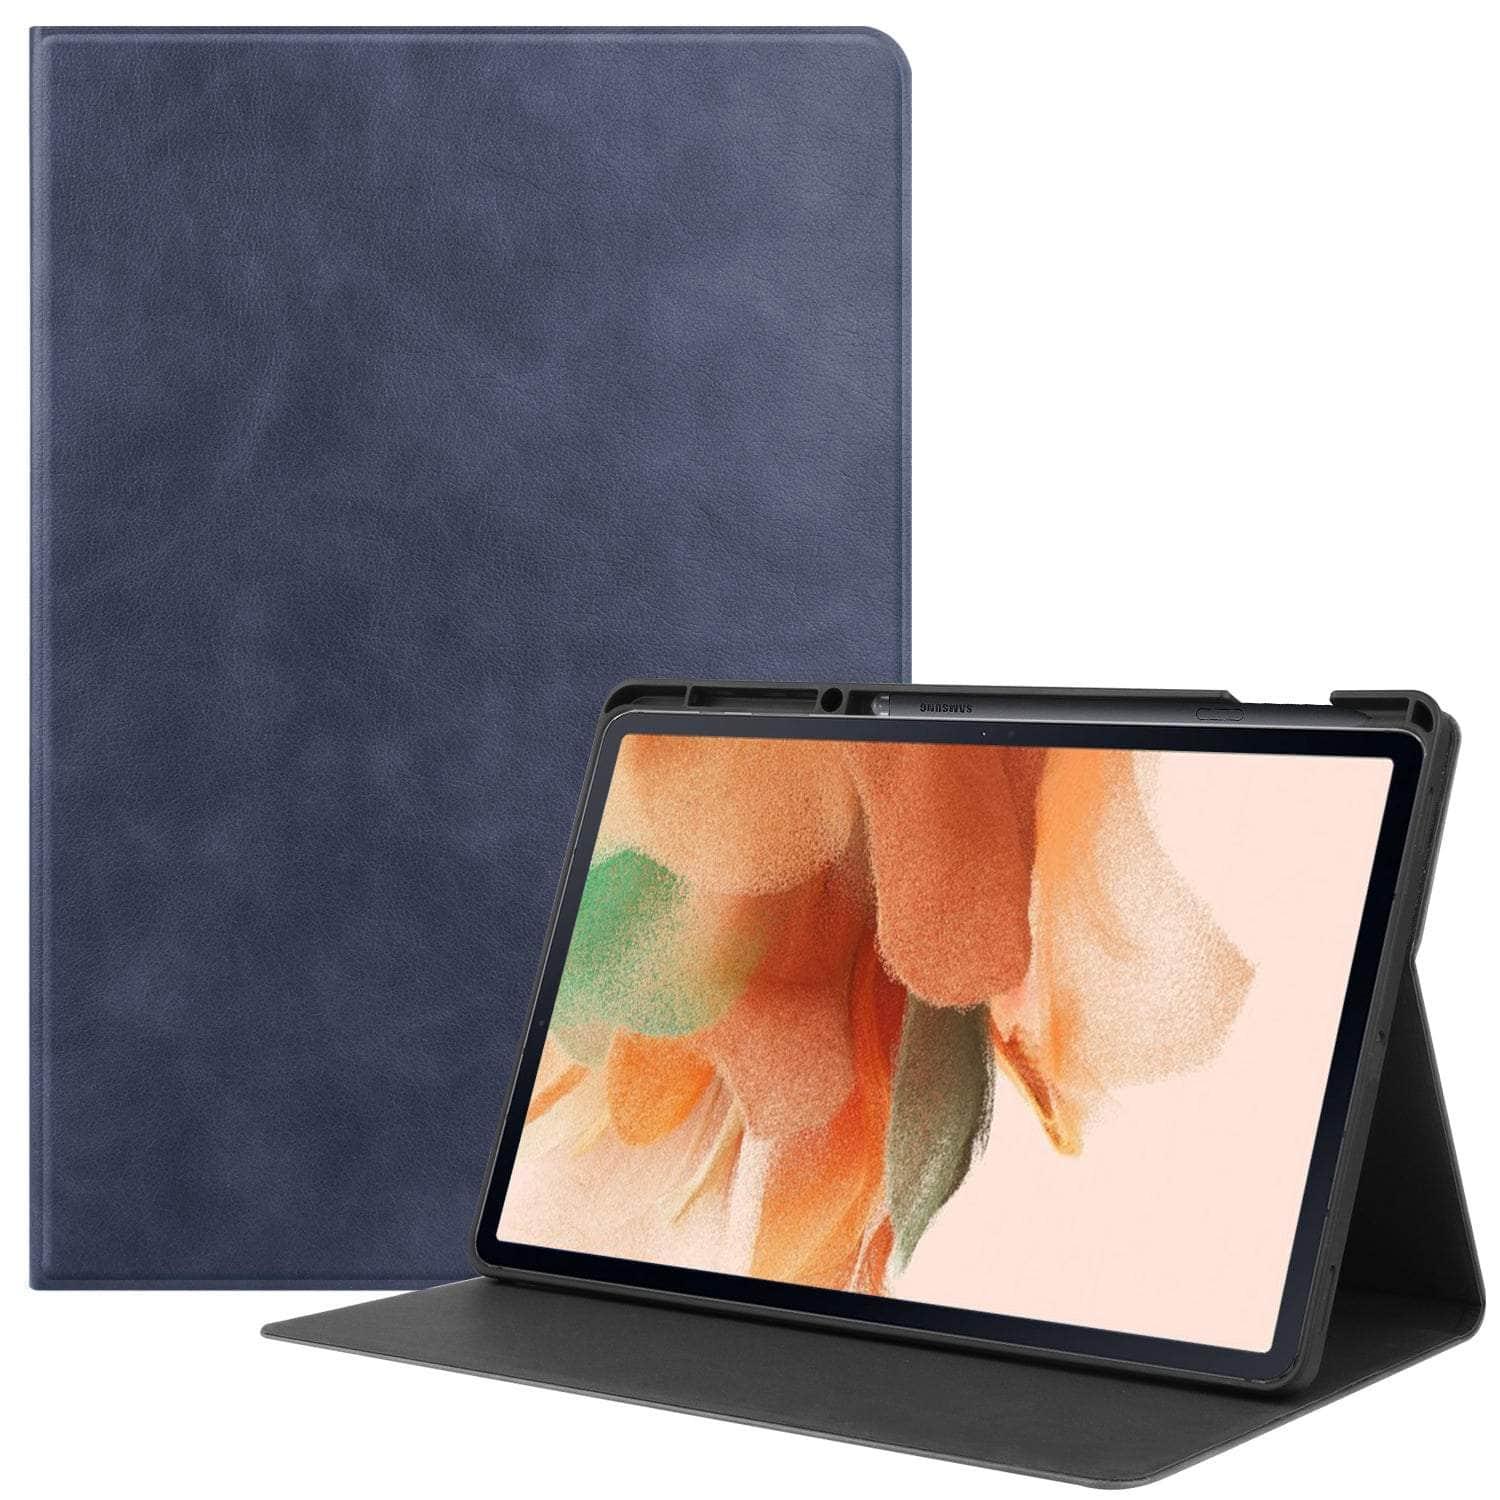 CaseBuddy Australia Casebuddy Smart Tab S8 Plus X800 Protective Magnetic Adsorption Cowhide Leather Case